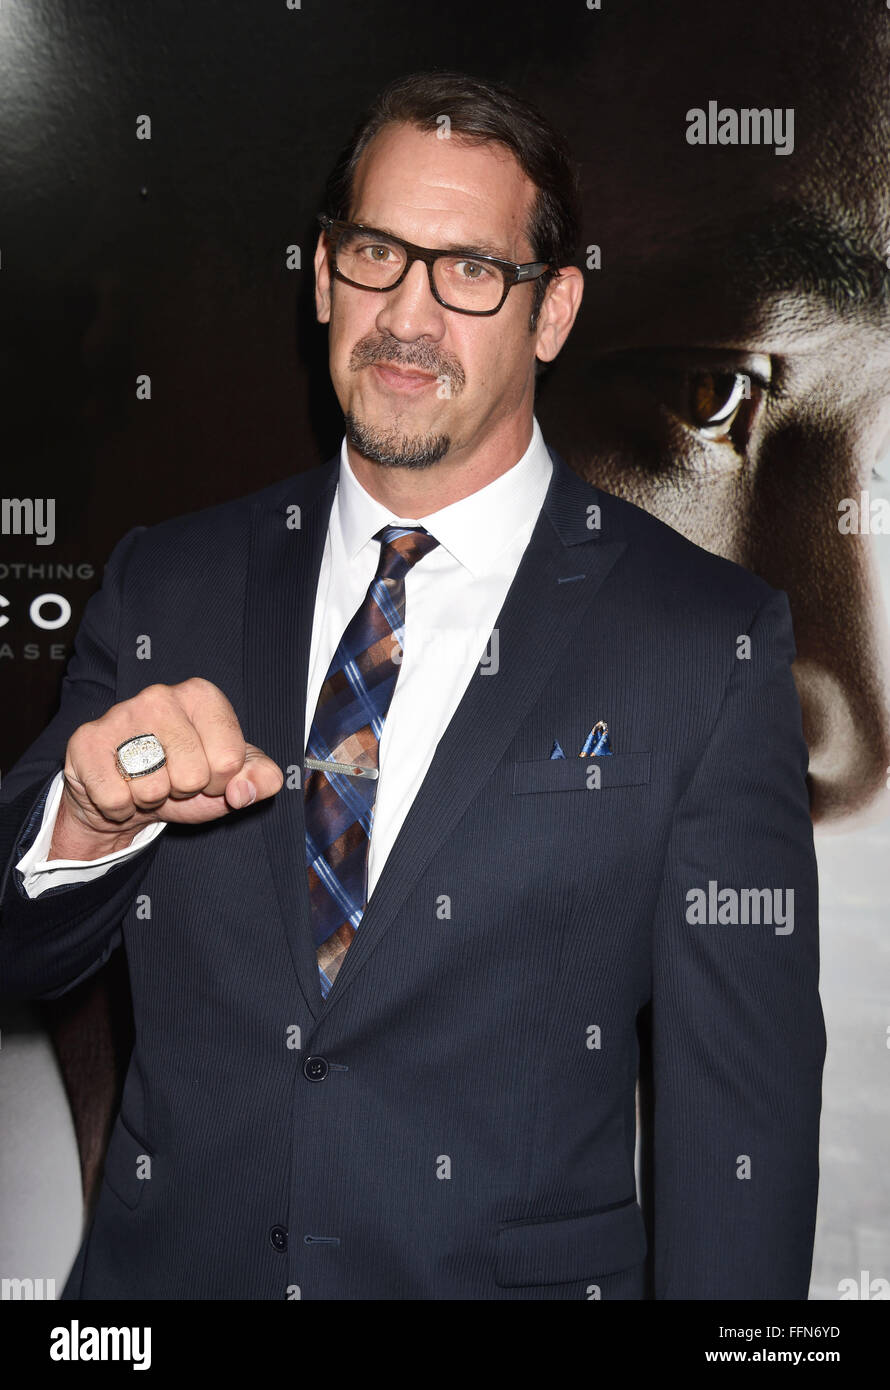 Actor/former NFL player Matthew Willig attends the screening of Columbia Pictures' 'Concussion' at the Regency Village Theater on November 23, 2015 in Westwood, California., Stock Photo